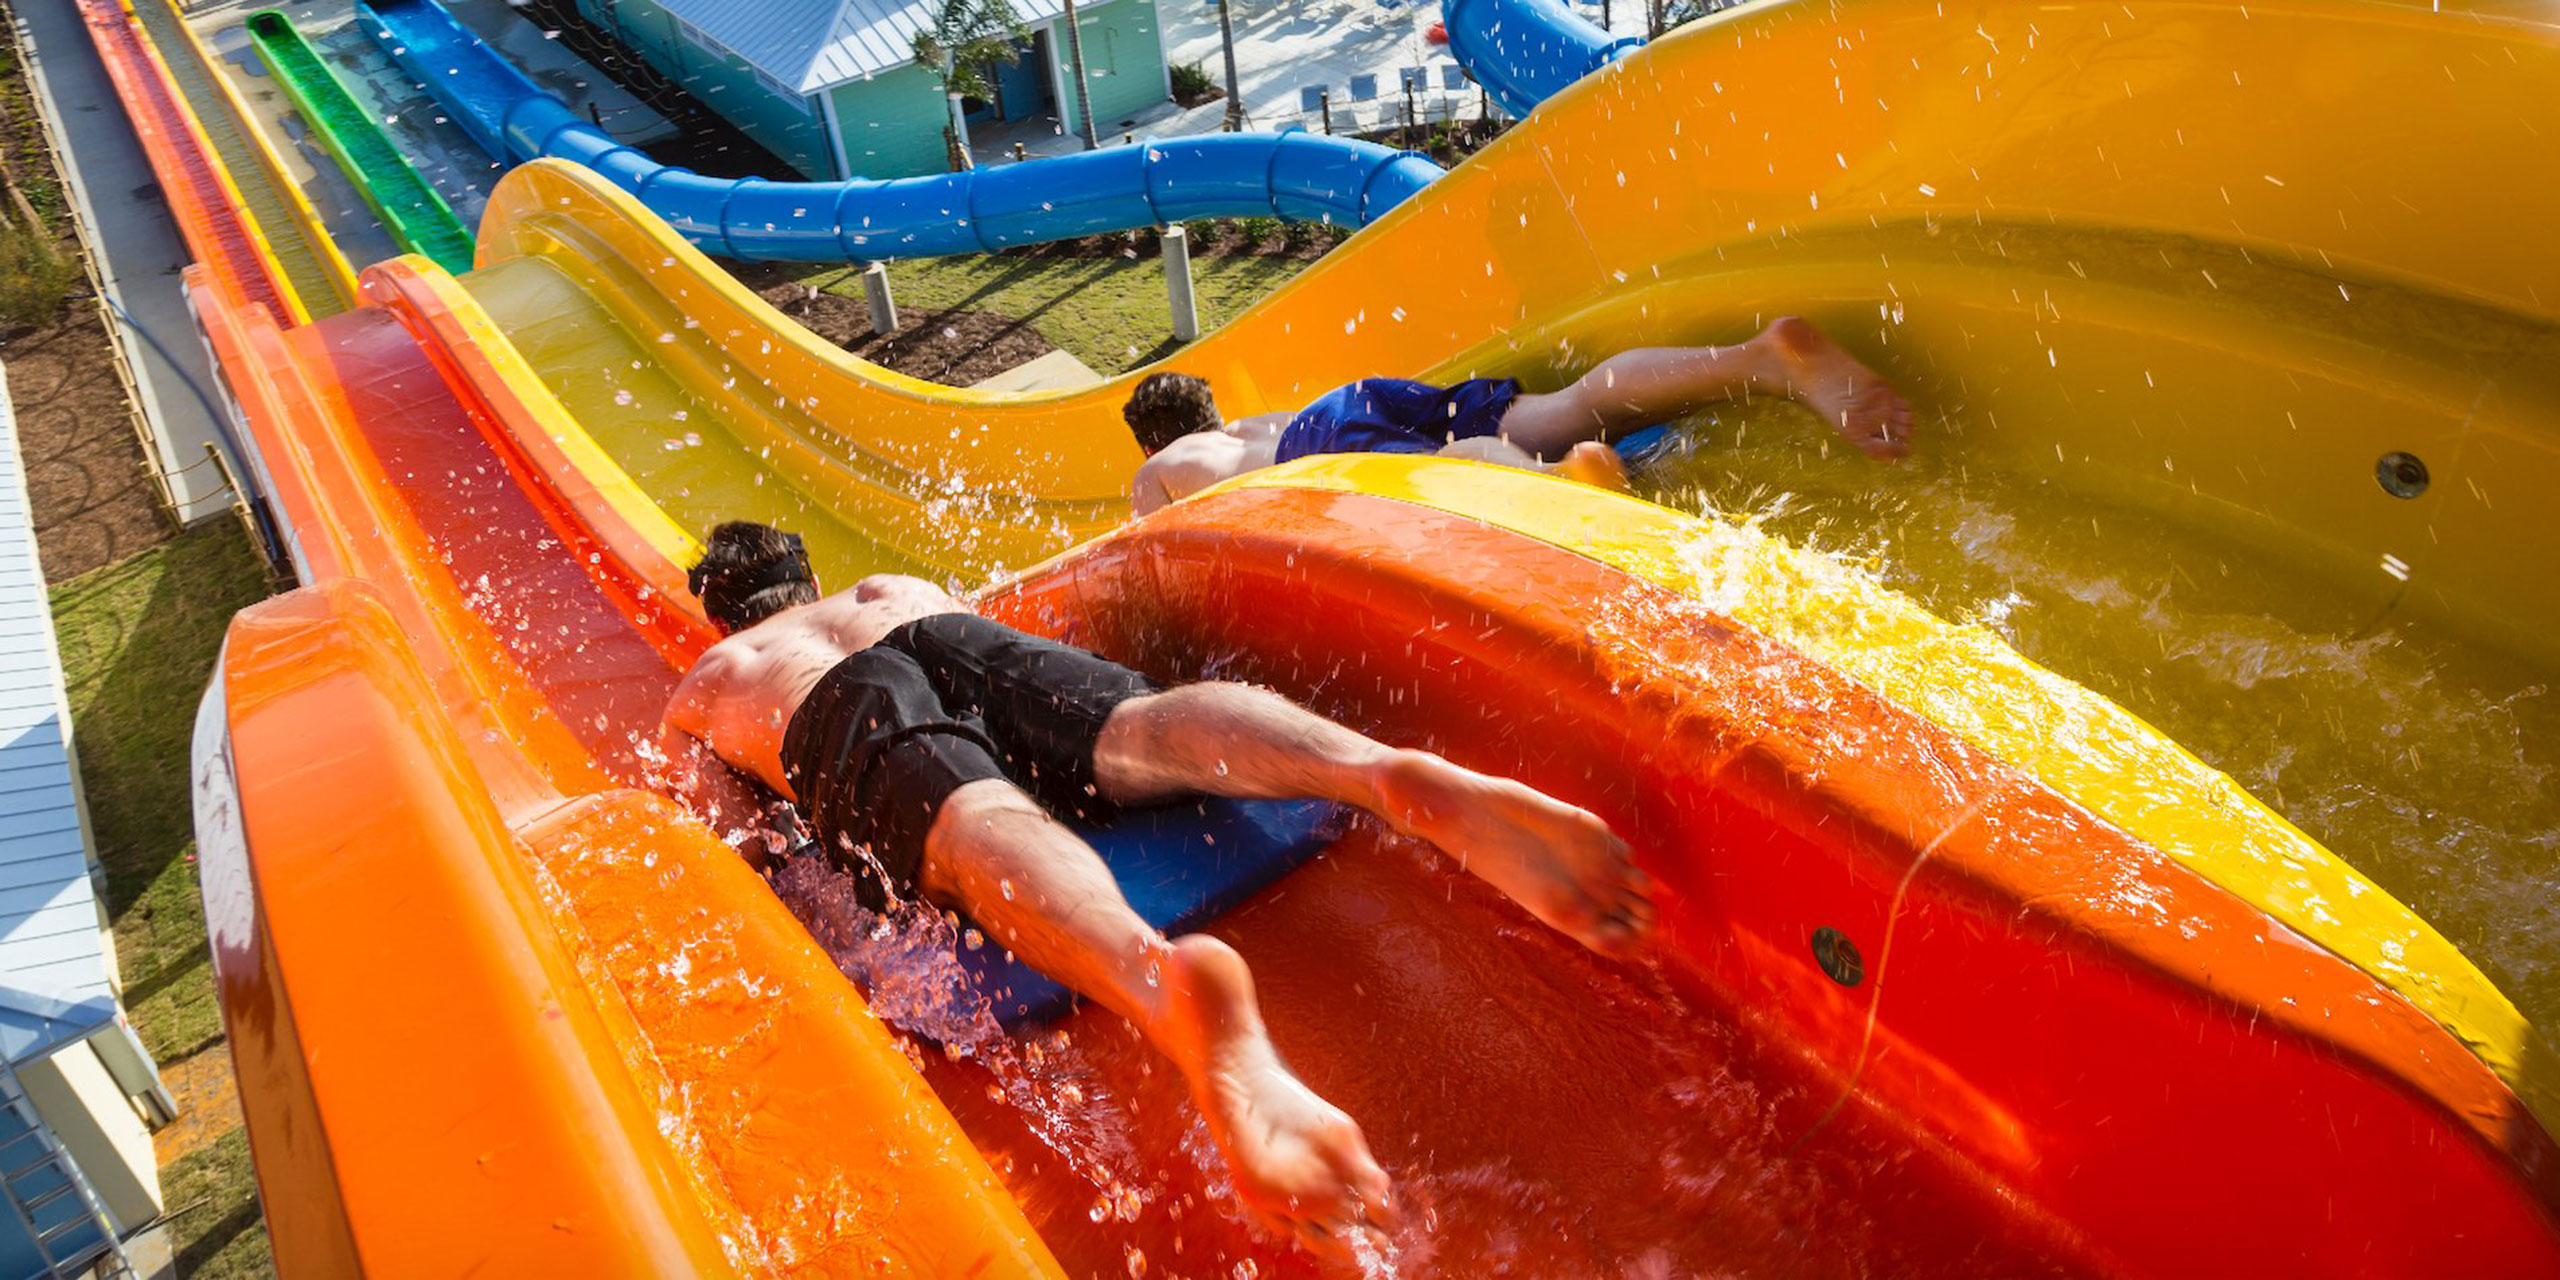 Waterslides at Encore Resort at Reunion in Florida; Courtesy of Encore Resort at Reunion